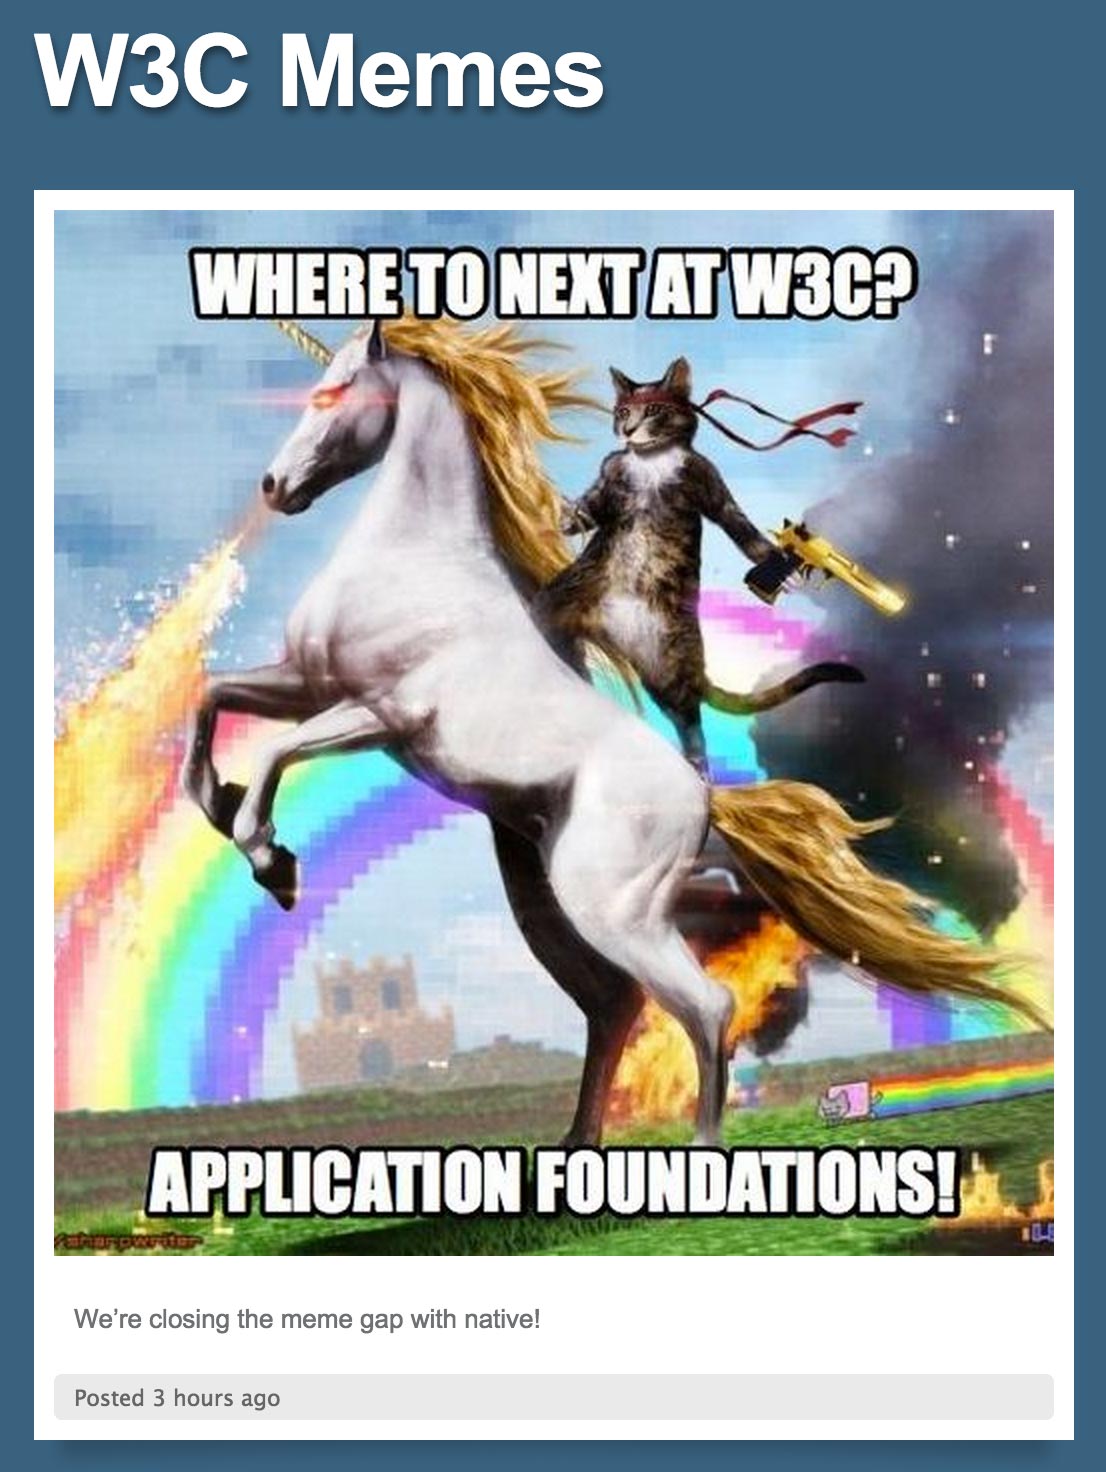 The snarky W3C Memes blog pokes fun at the W3C's grand ambitions to compete with mobile apps with better Web standards.